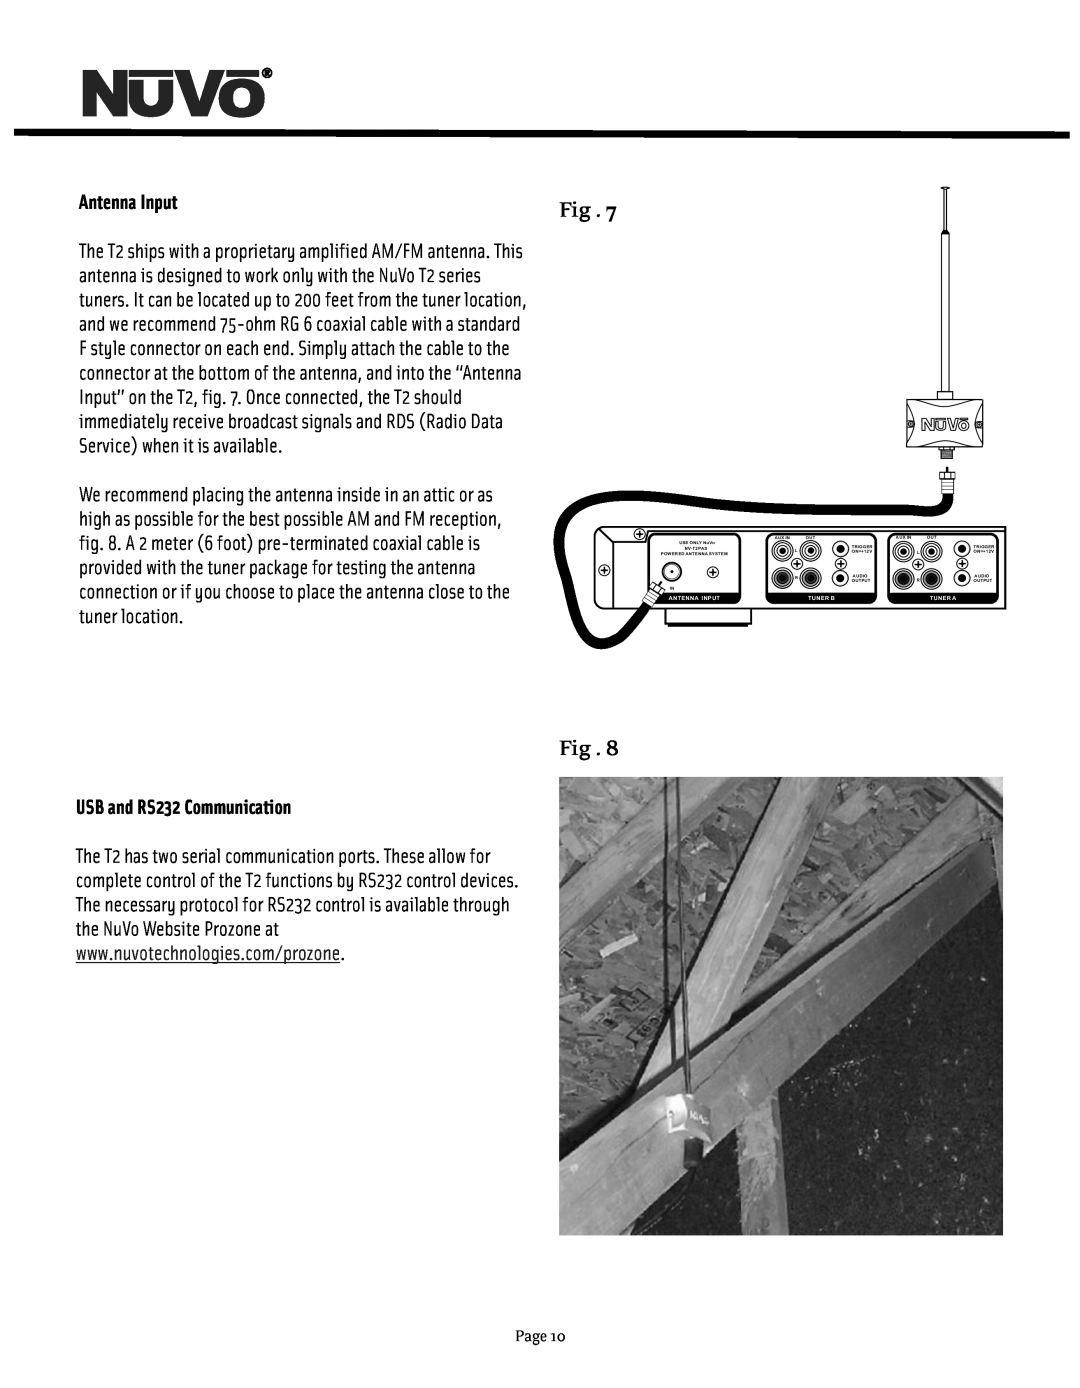 Nuvo NV-T2DF manual Antenna Input, USB and RS232 Communication, Page 